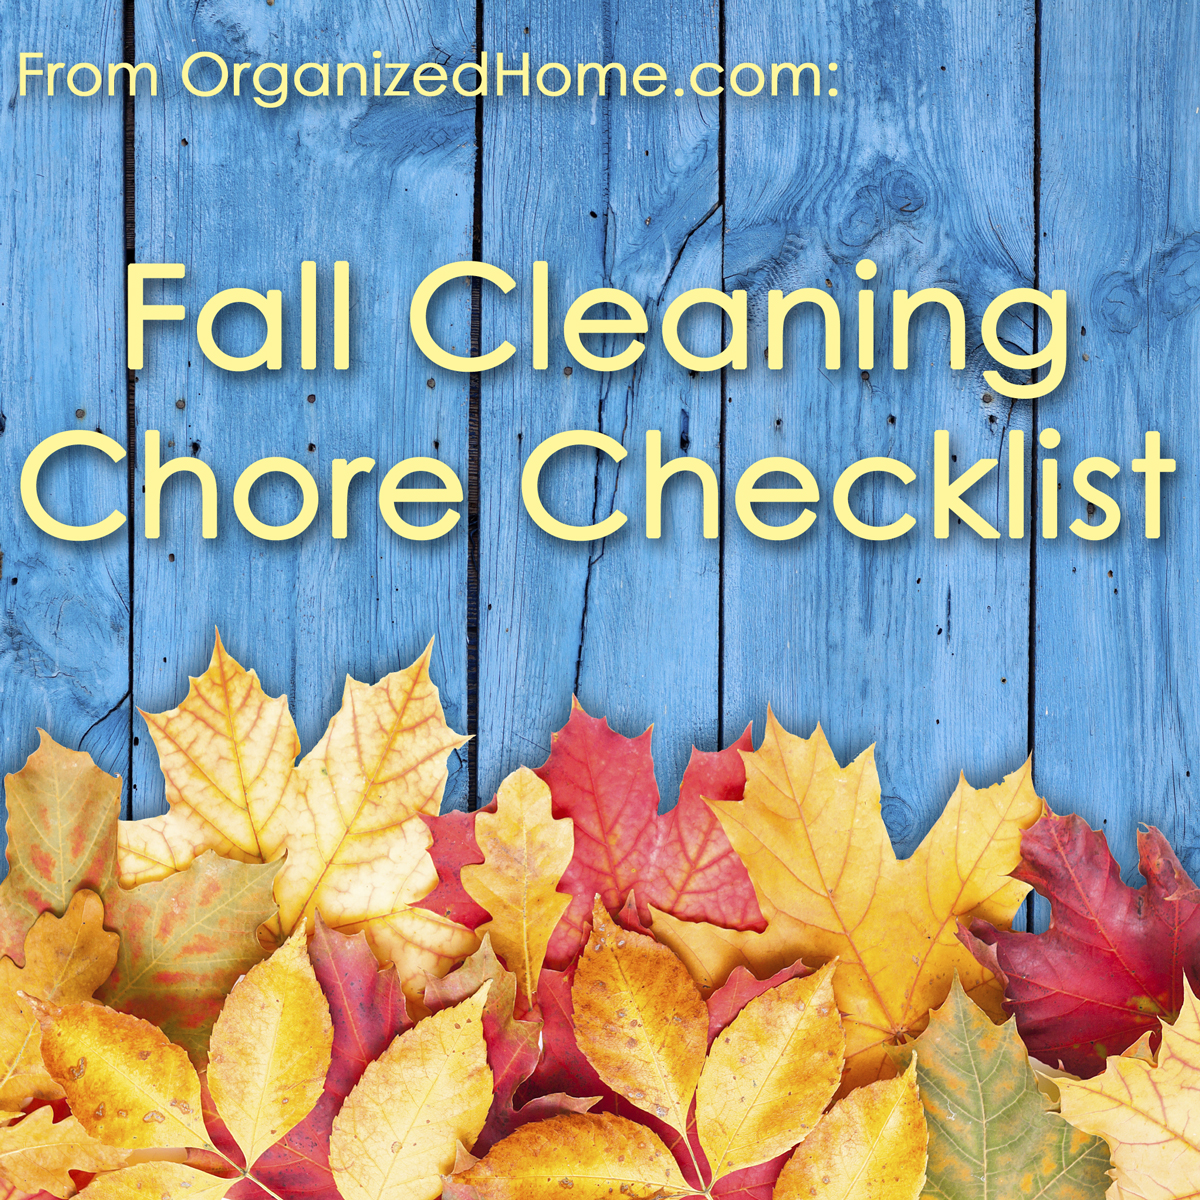 Fall Cleaning Chore Checklist